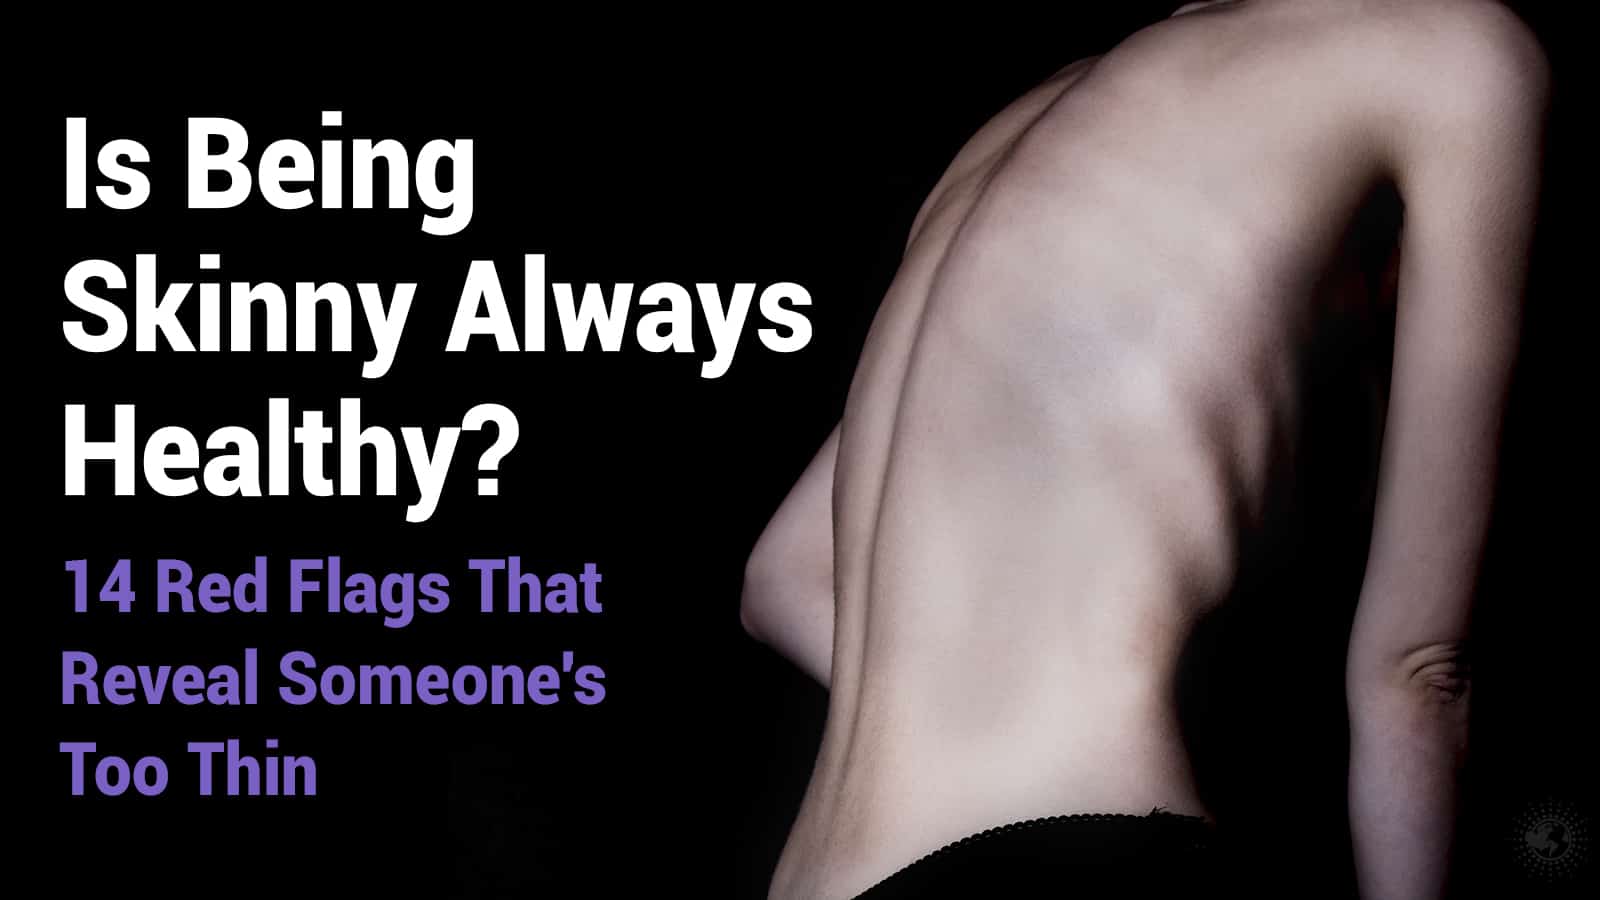 Is Being Skinny Always Healthy? 14 Red Flags That Reveal Someone’s Too Thin